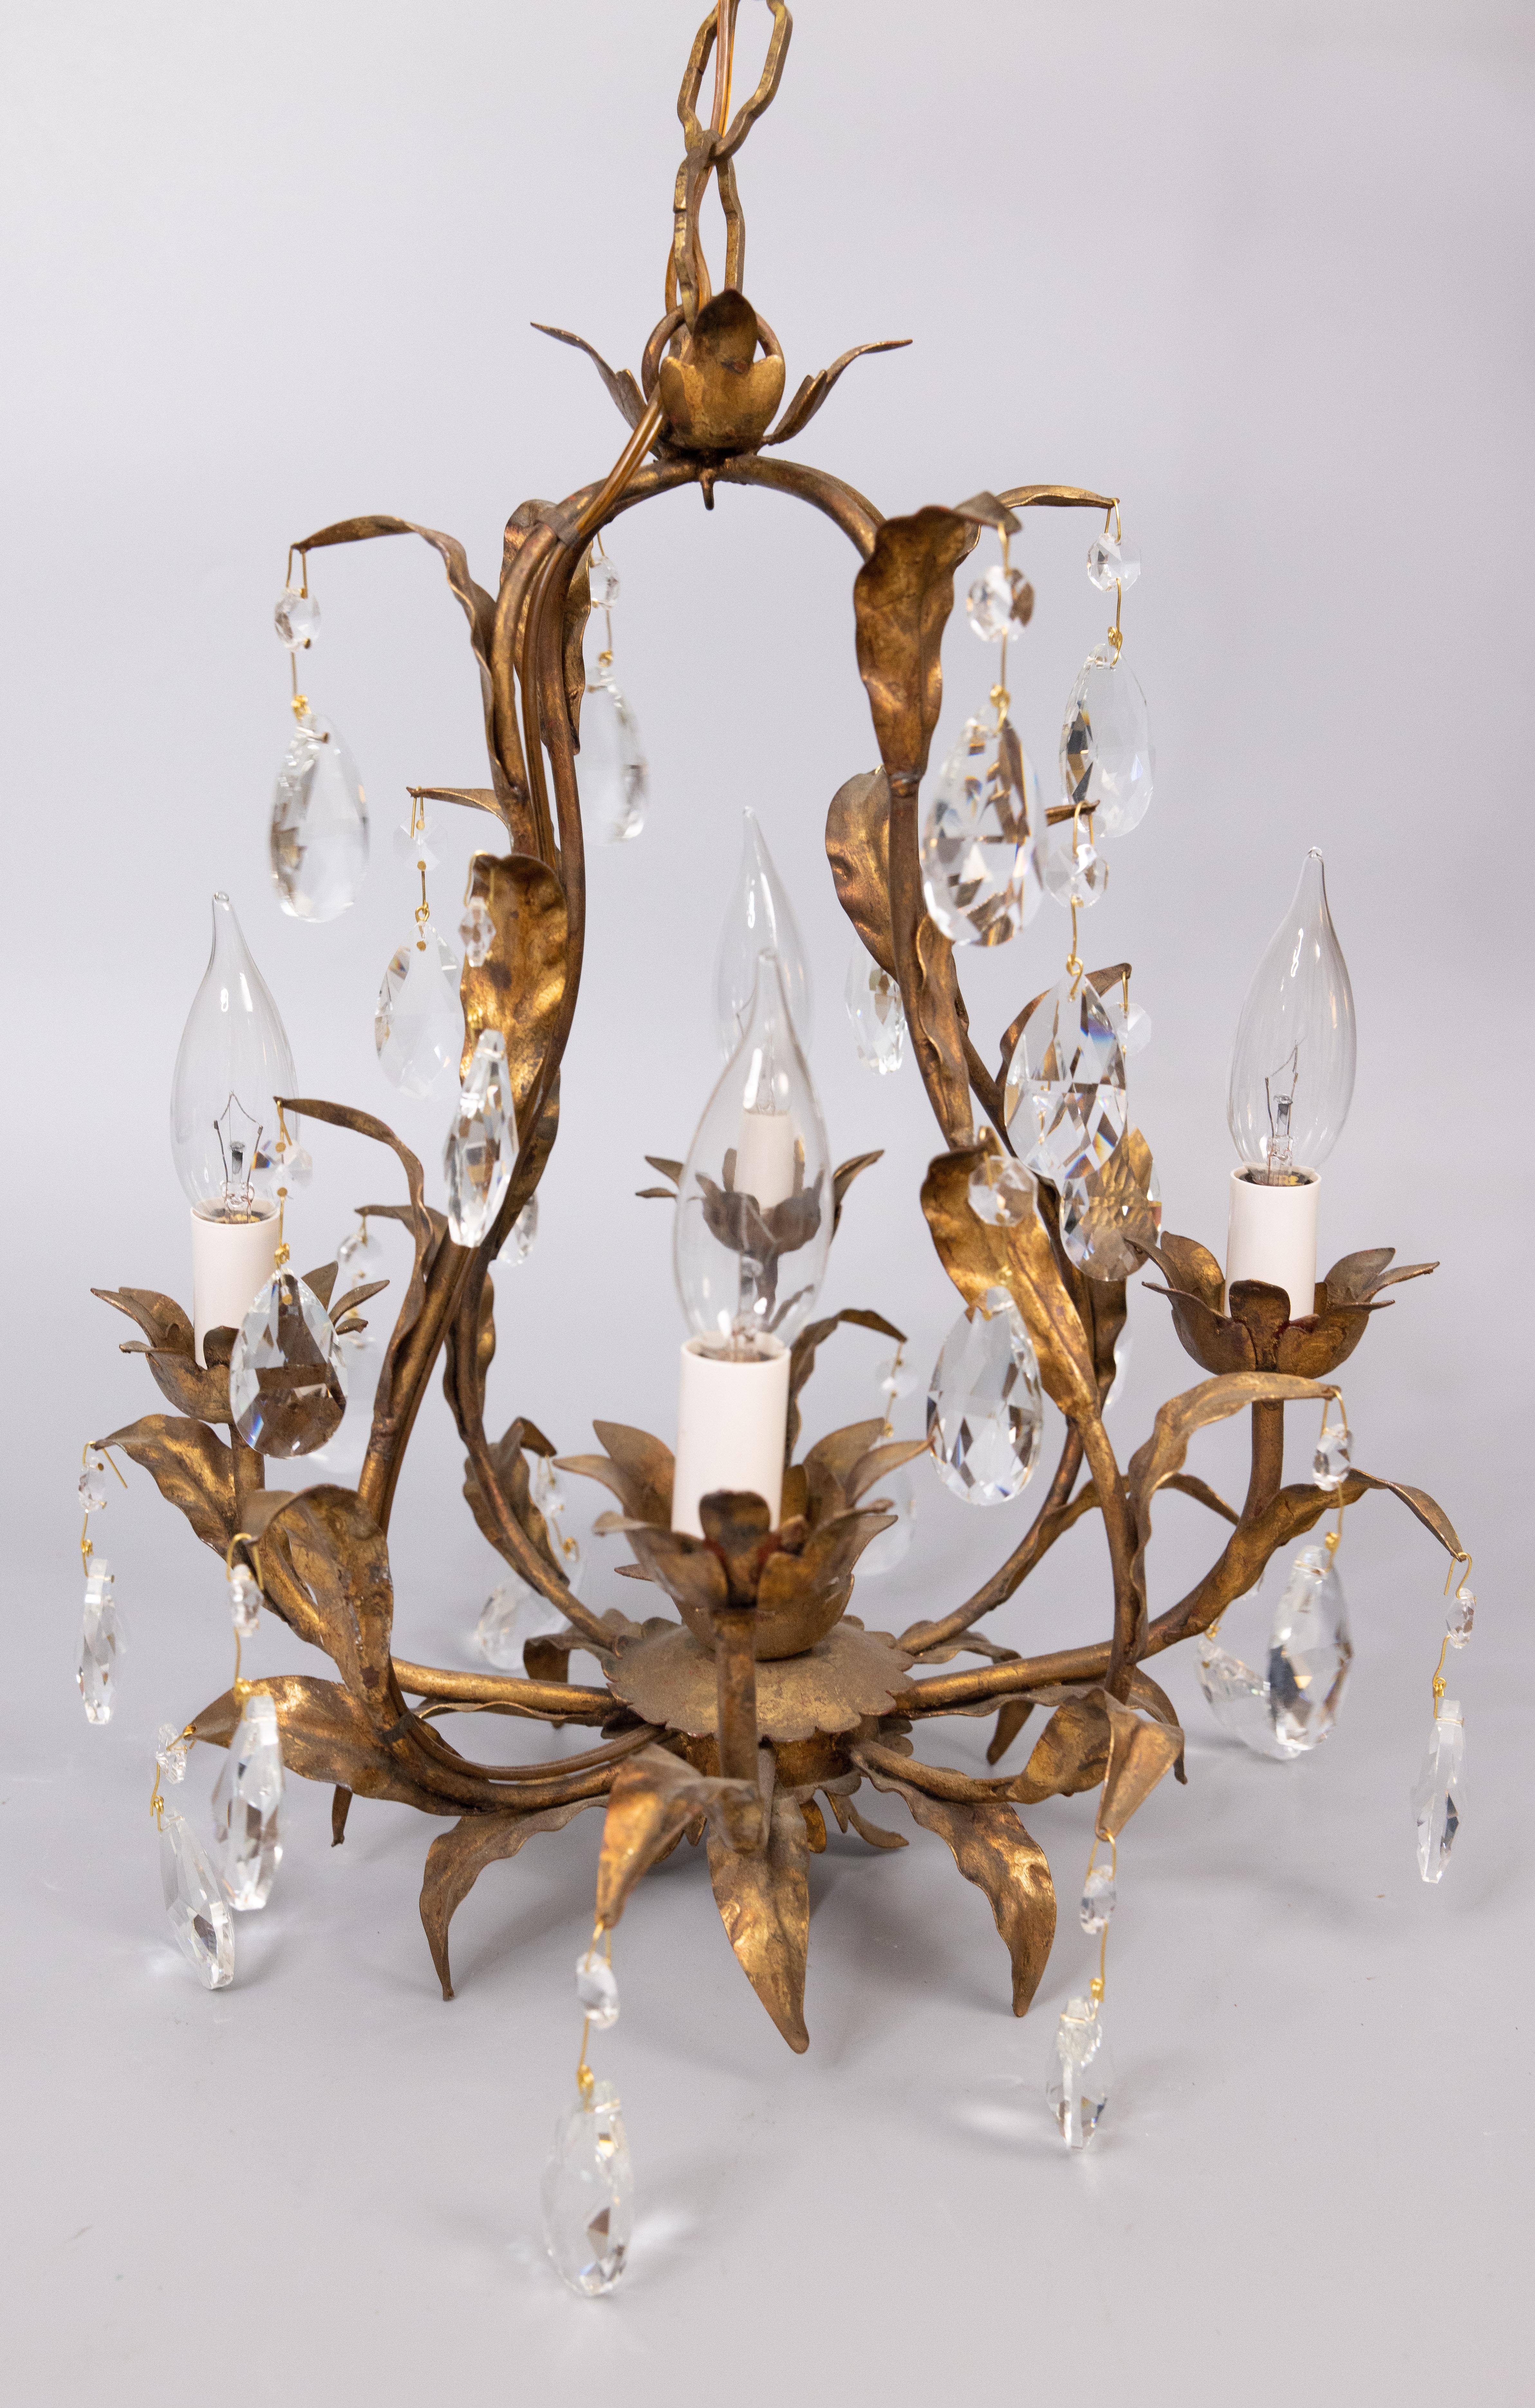 A stunning mid-20th century Italian gilded tole and crystals four arm chandelier. This gorgeous chandelier has crystals and scrolling leaves in a beautiful gilt patina and drippy wax candle sleeves. It's in excellent working condition and comes with